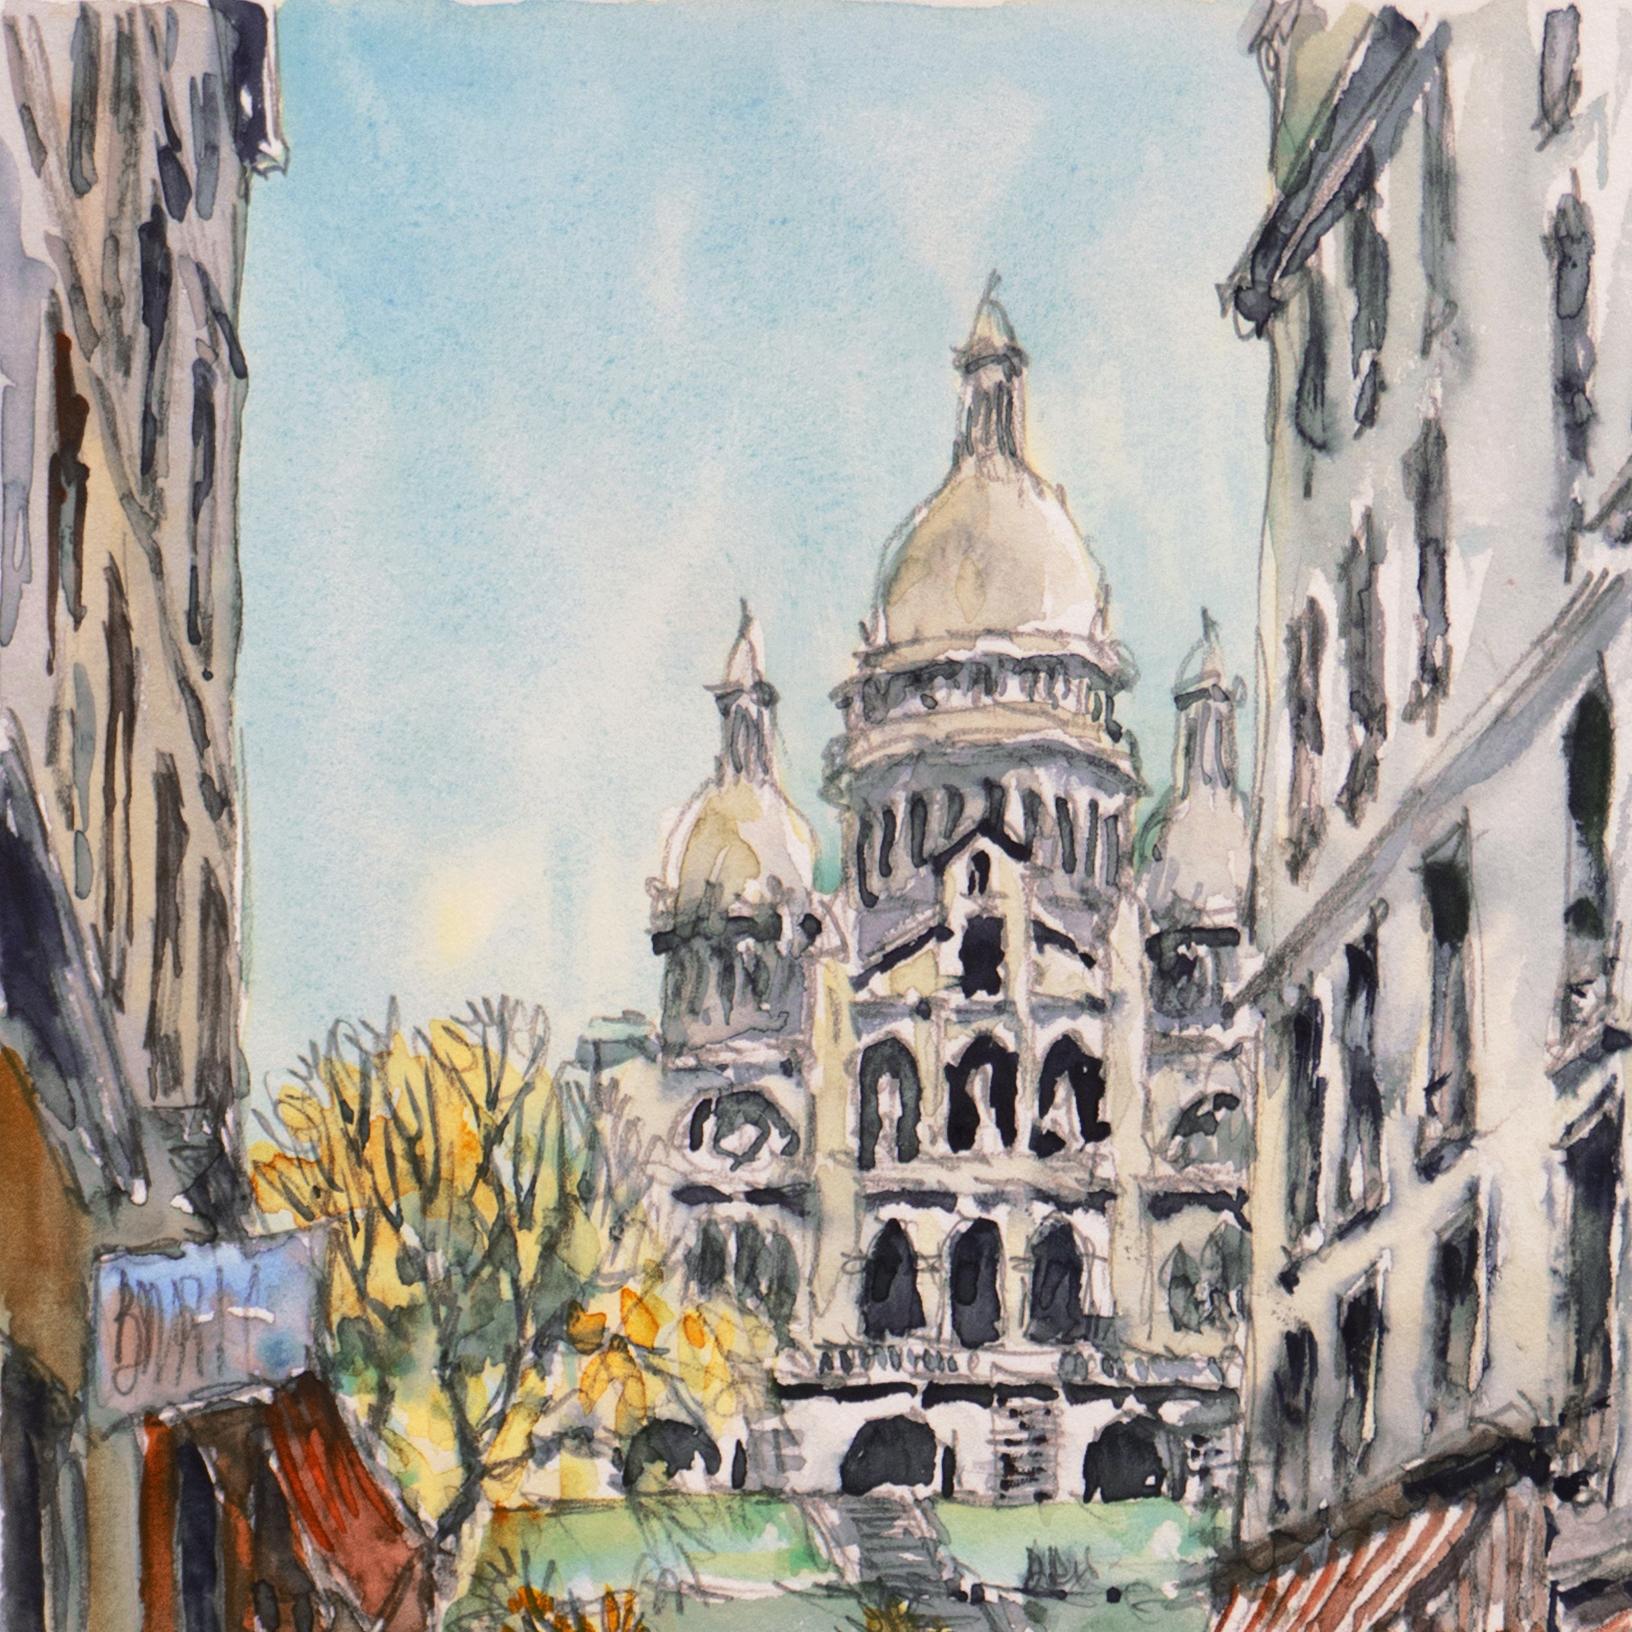 Signed lower right, 'P. E. Cambier' for Pierre Eugene Cambier (French, 1914-2000) and painted circa 1985. Titled outside of design, lower right, 'Montmartre - Le Sacre Coeur'.
Paper dimensions: 10.25 x 8 inches
Previously with: Park West Galleries,